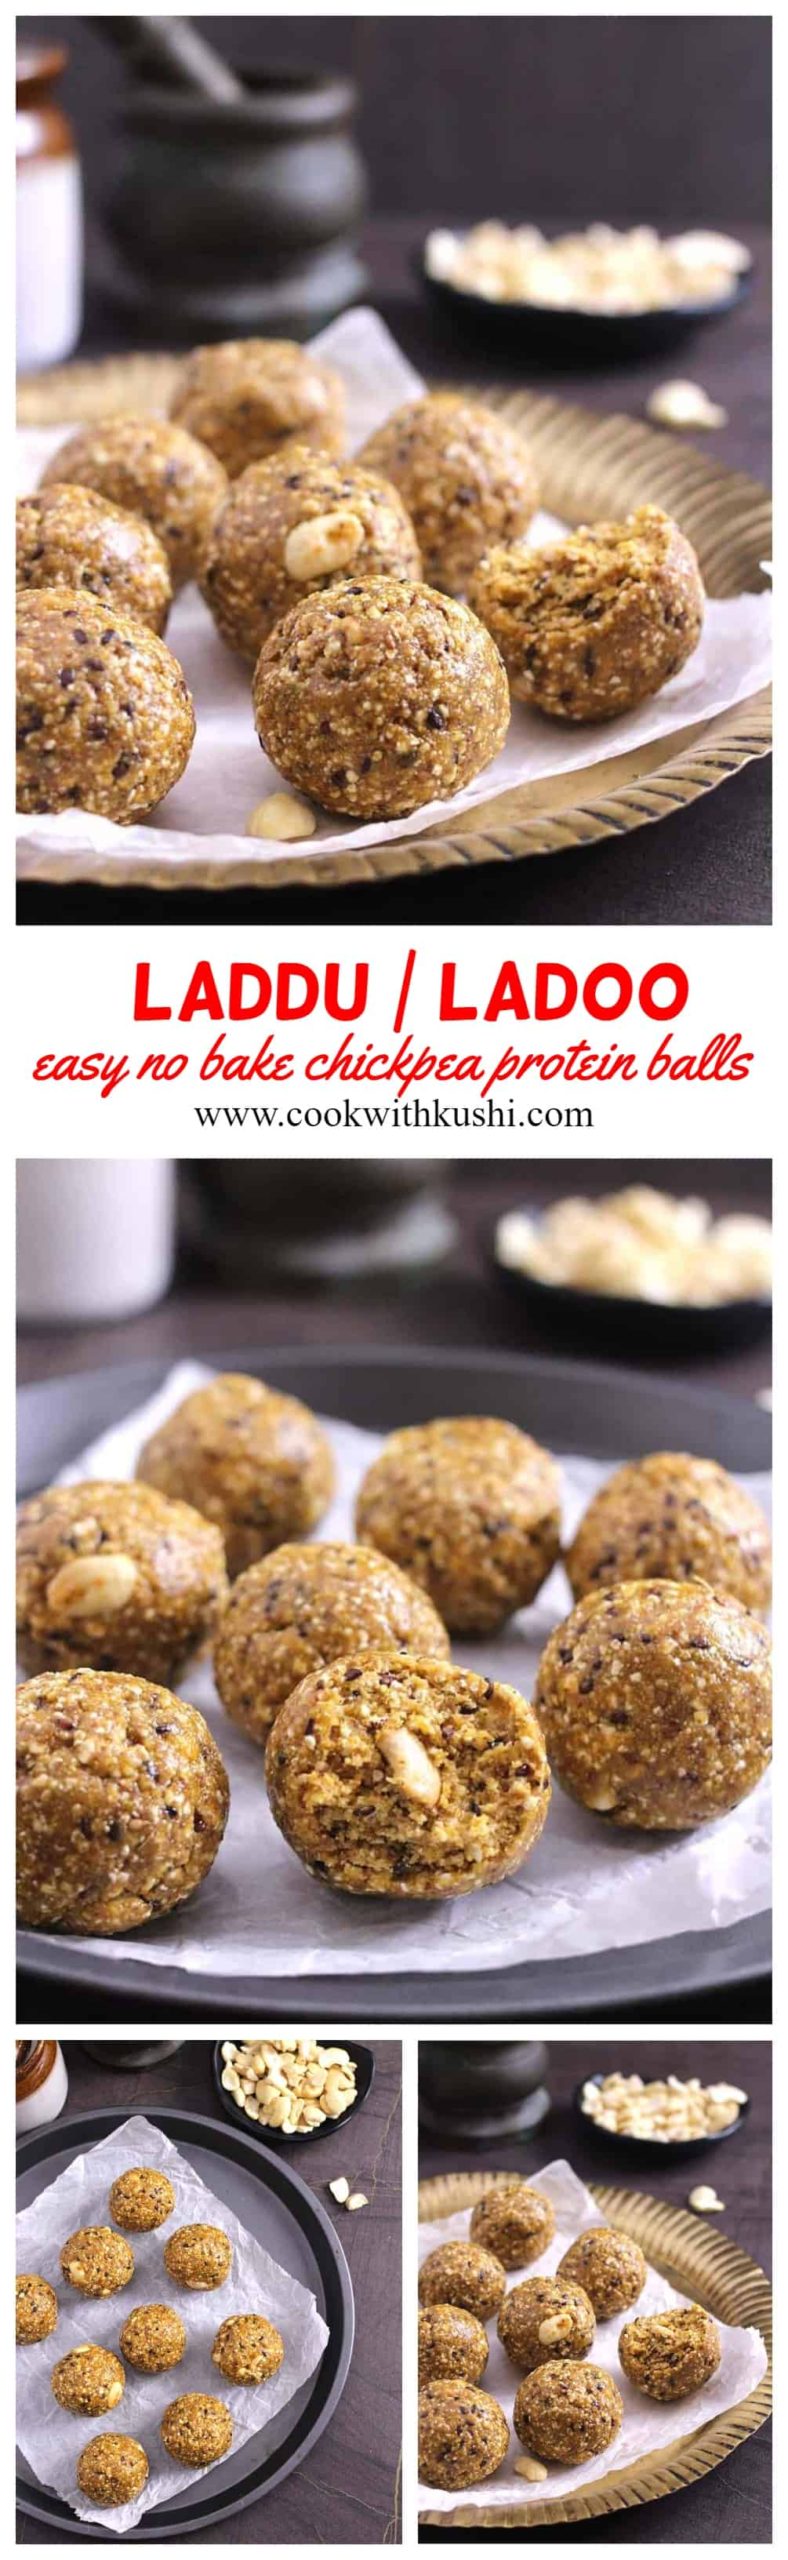 Laddu is prepared mainly during Janmashtami and Ganesh Chaturthi and offered to God in the form of naivedyam and then distributed as prasad. #ladoo #Laddu #ganeshchaturthi #navratri #diwali #janmashtami